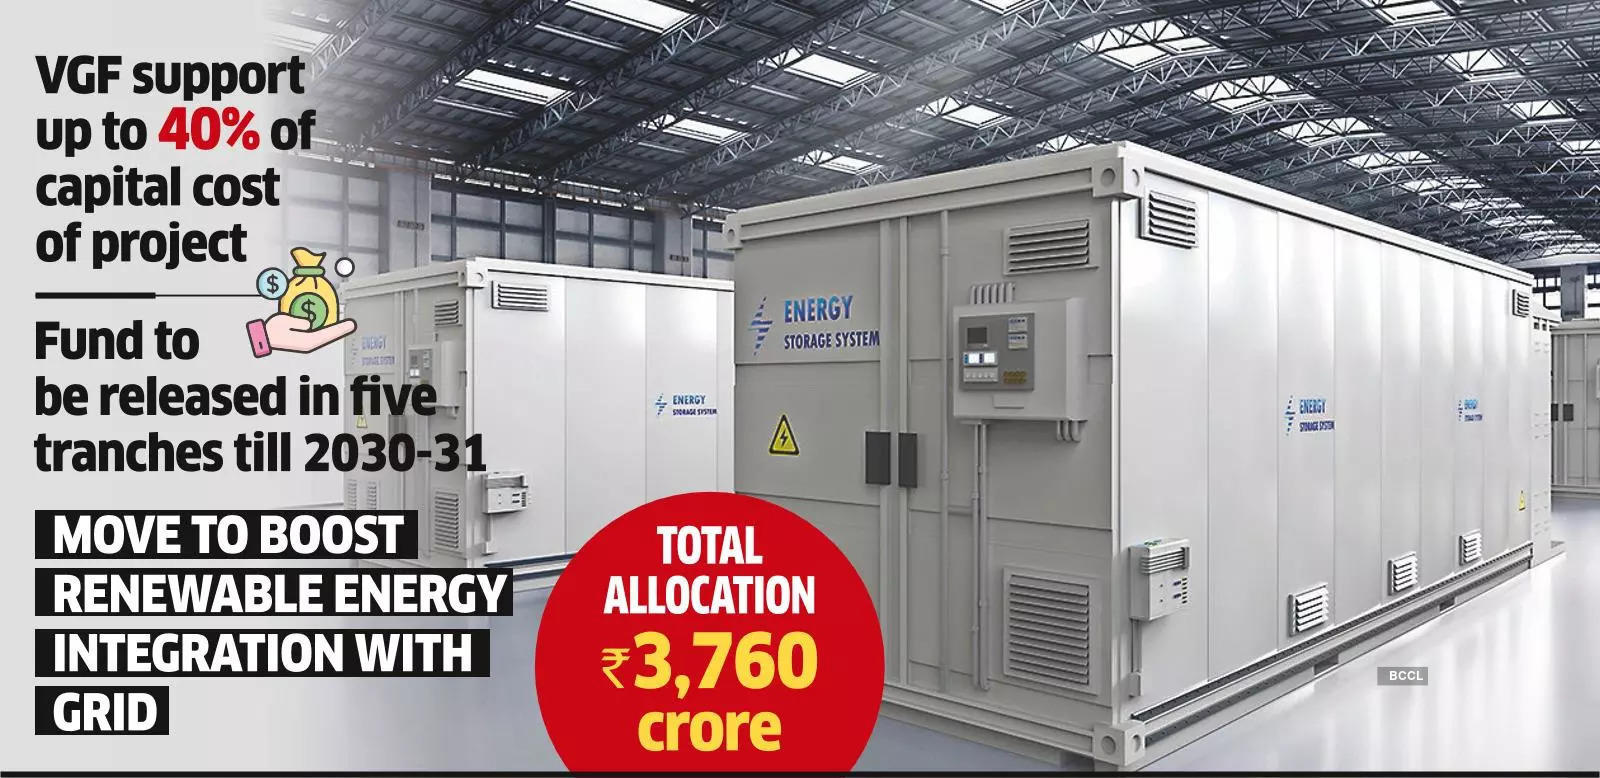 Cabinet Approves Rs 3,760 Crore Viability Gap Funding Scheme for 4 GW Battery Storage by 2030-31_40.1